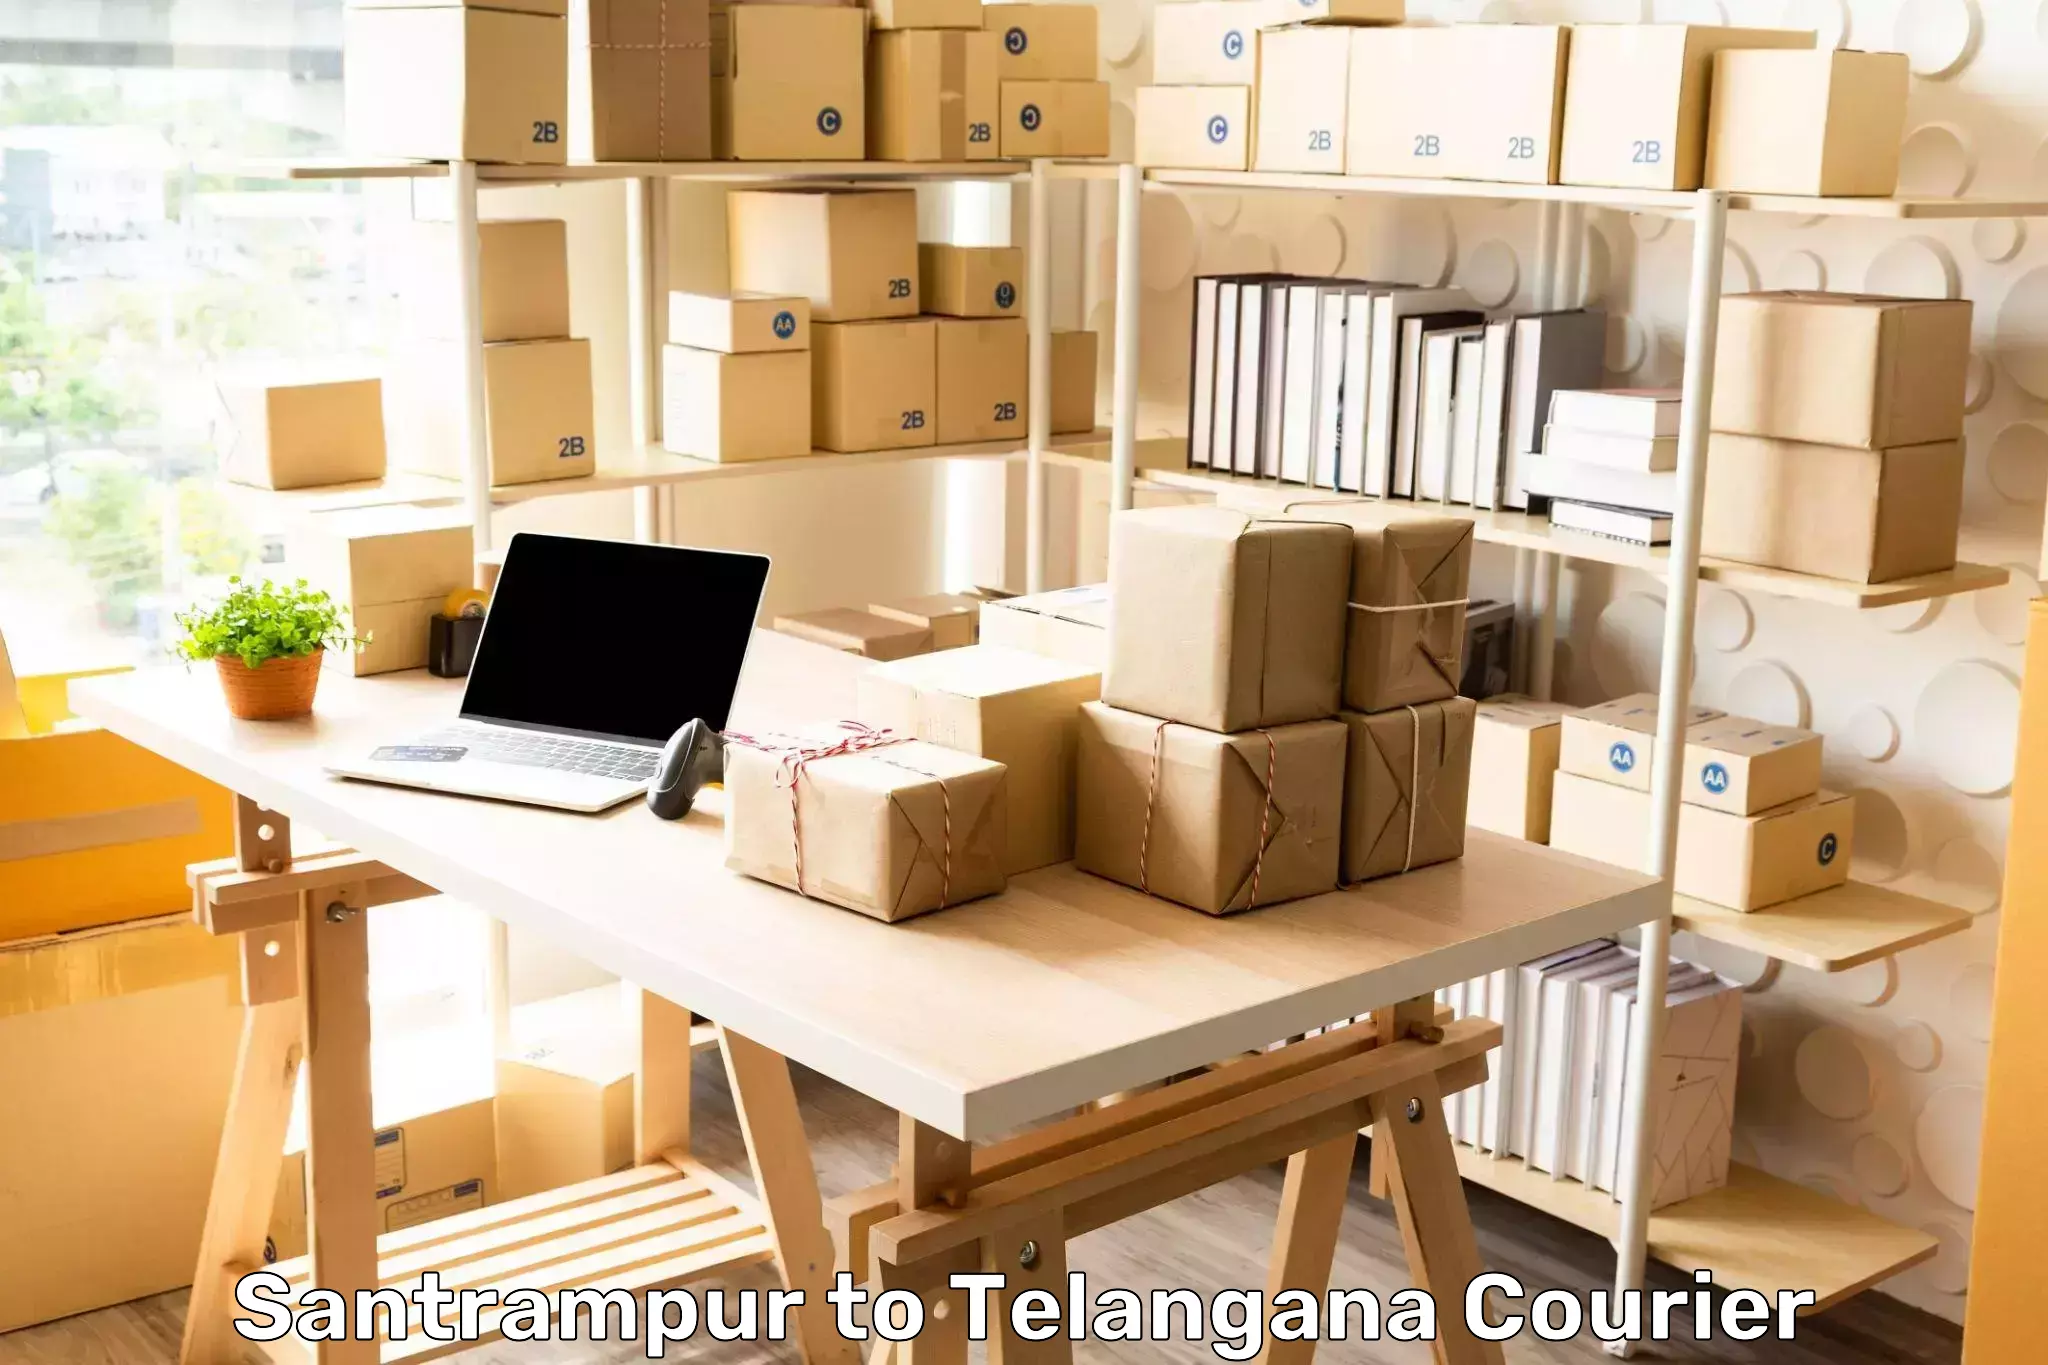 Local courier options Santrampur to Telangana